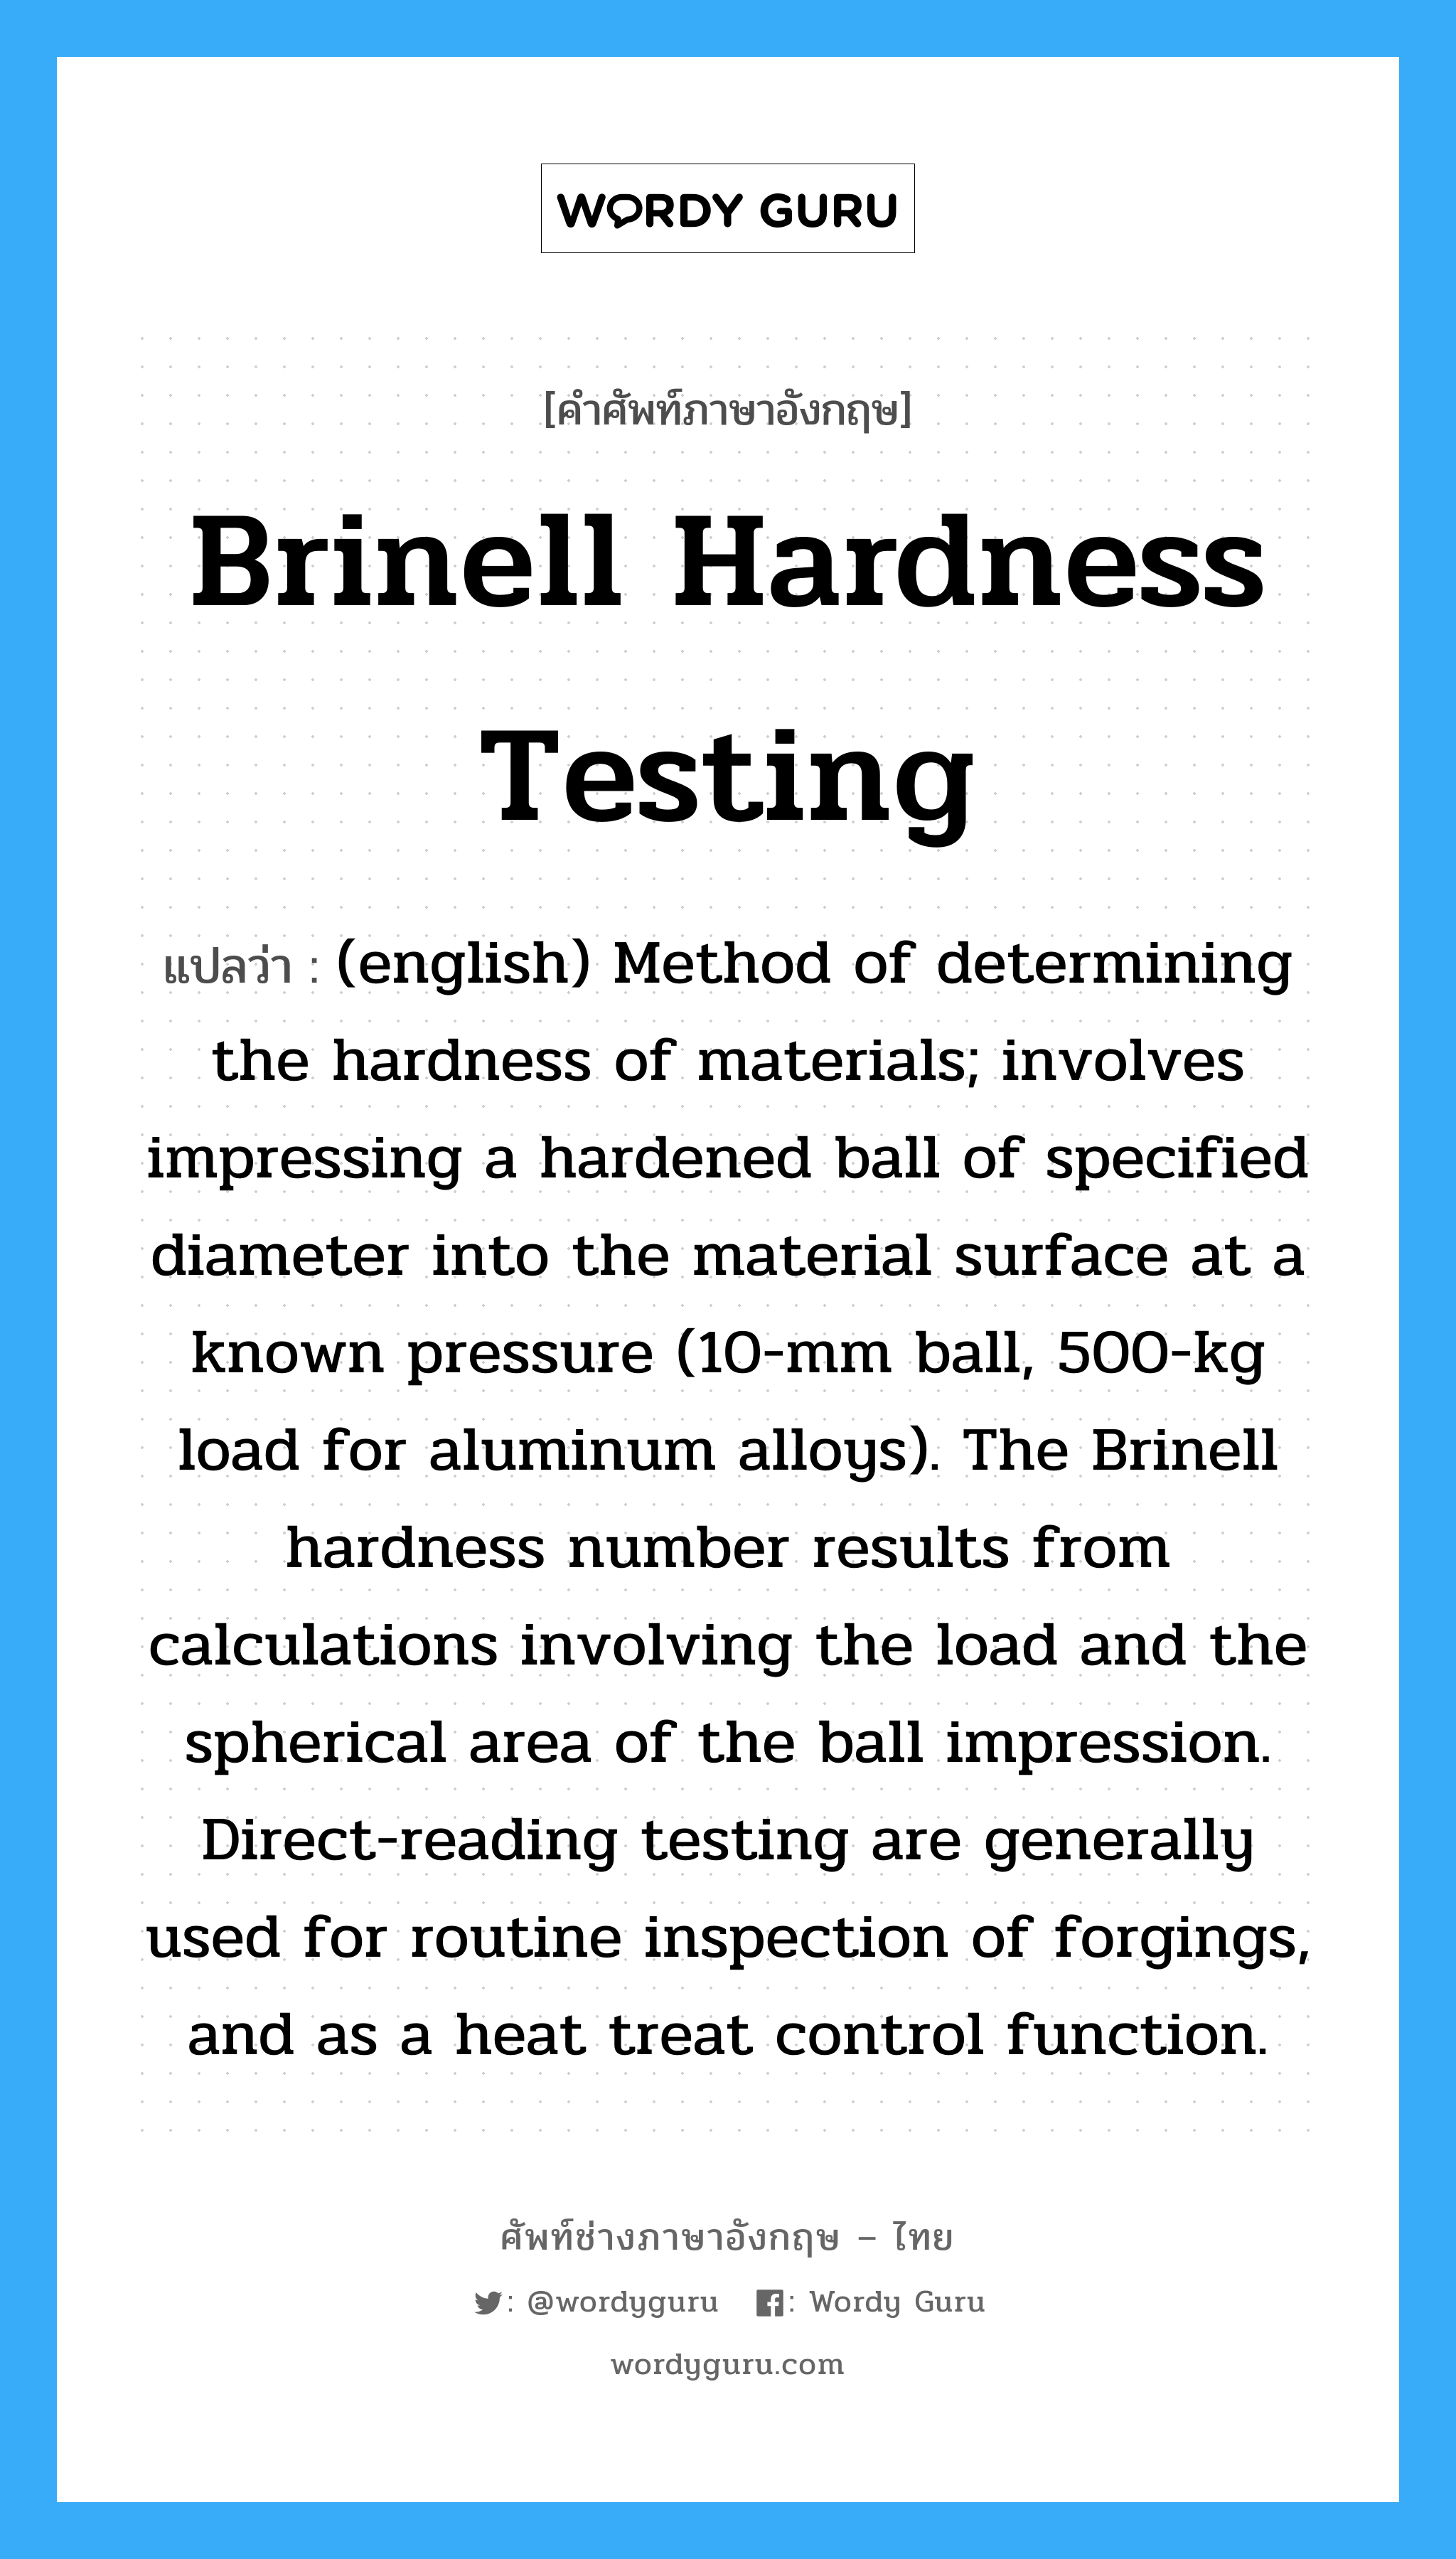 Brinell Hardness Testing แปลว่า?, คำศัพท์ช่างภาษาอังกฤษ - ไทย Brinell Hardness Testing คำศัพท์ภาษาอังกฤษ Brinell Hardness Testing แปลว่า (english) Method of determining the hardness of materials; involves impressing a hardened ball of specified diameter into the material surface at a known pressure (10-mm ball, 500-kg load for aluminum alloys). The Brinell hardness number results from calculations involving the load and the spherical area of the ball impression. Direct-reading testing are generally used for routine inspection of forgings, and as a heat treat control function.